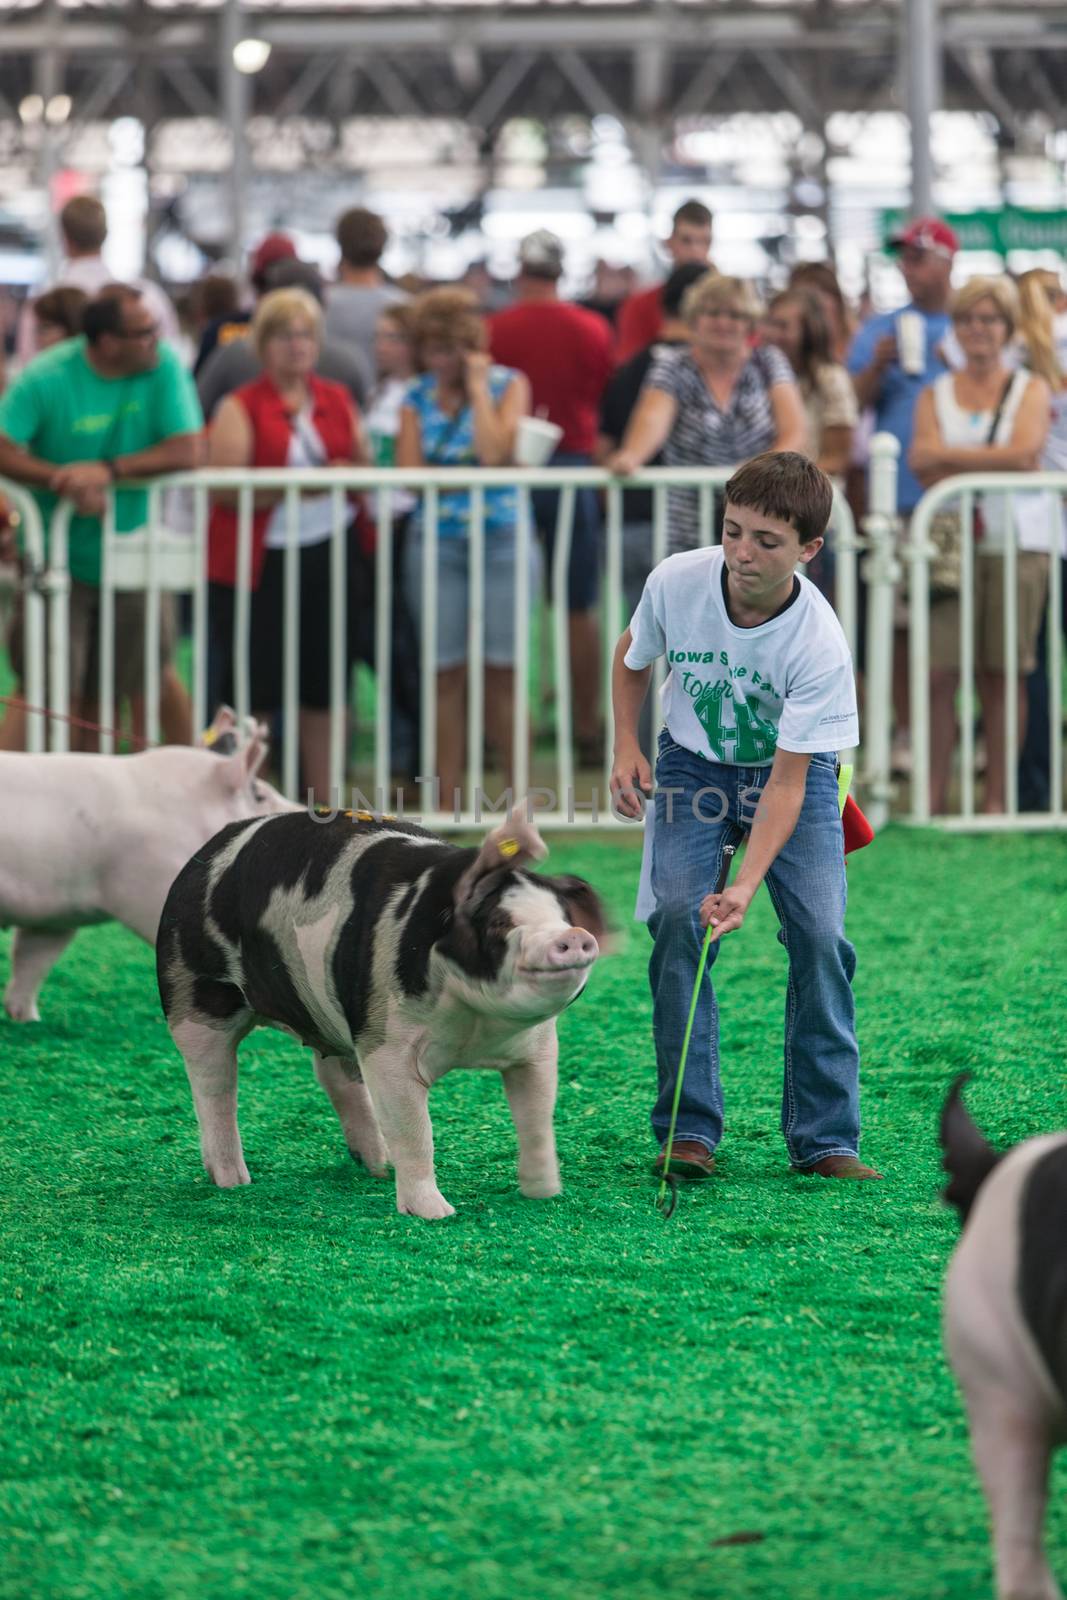 Teen with pigs at Iowa State Fair by Creatista